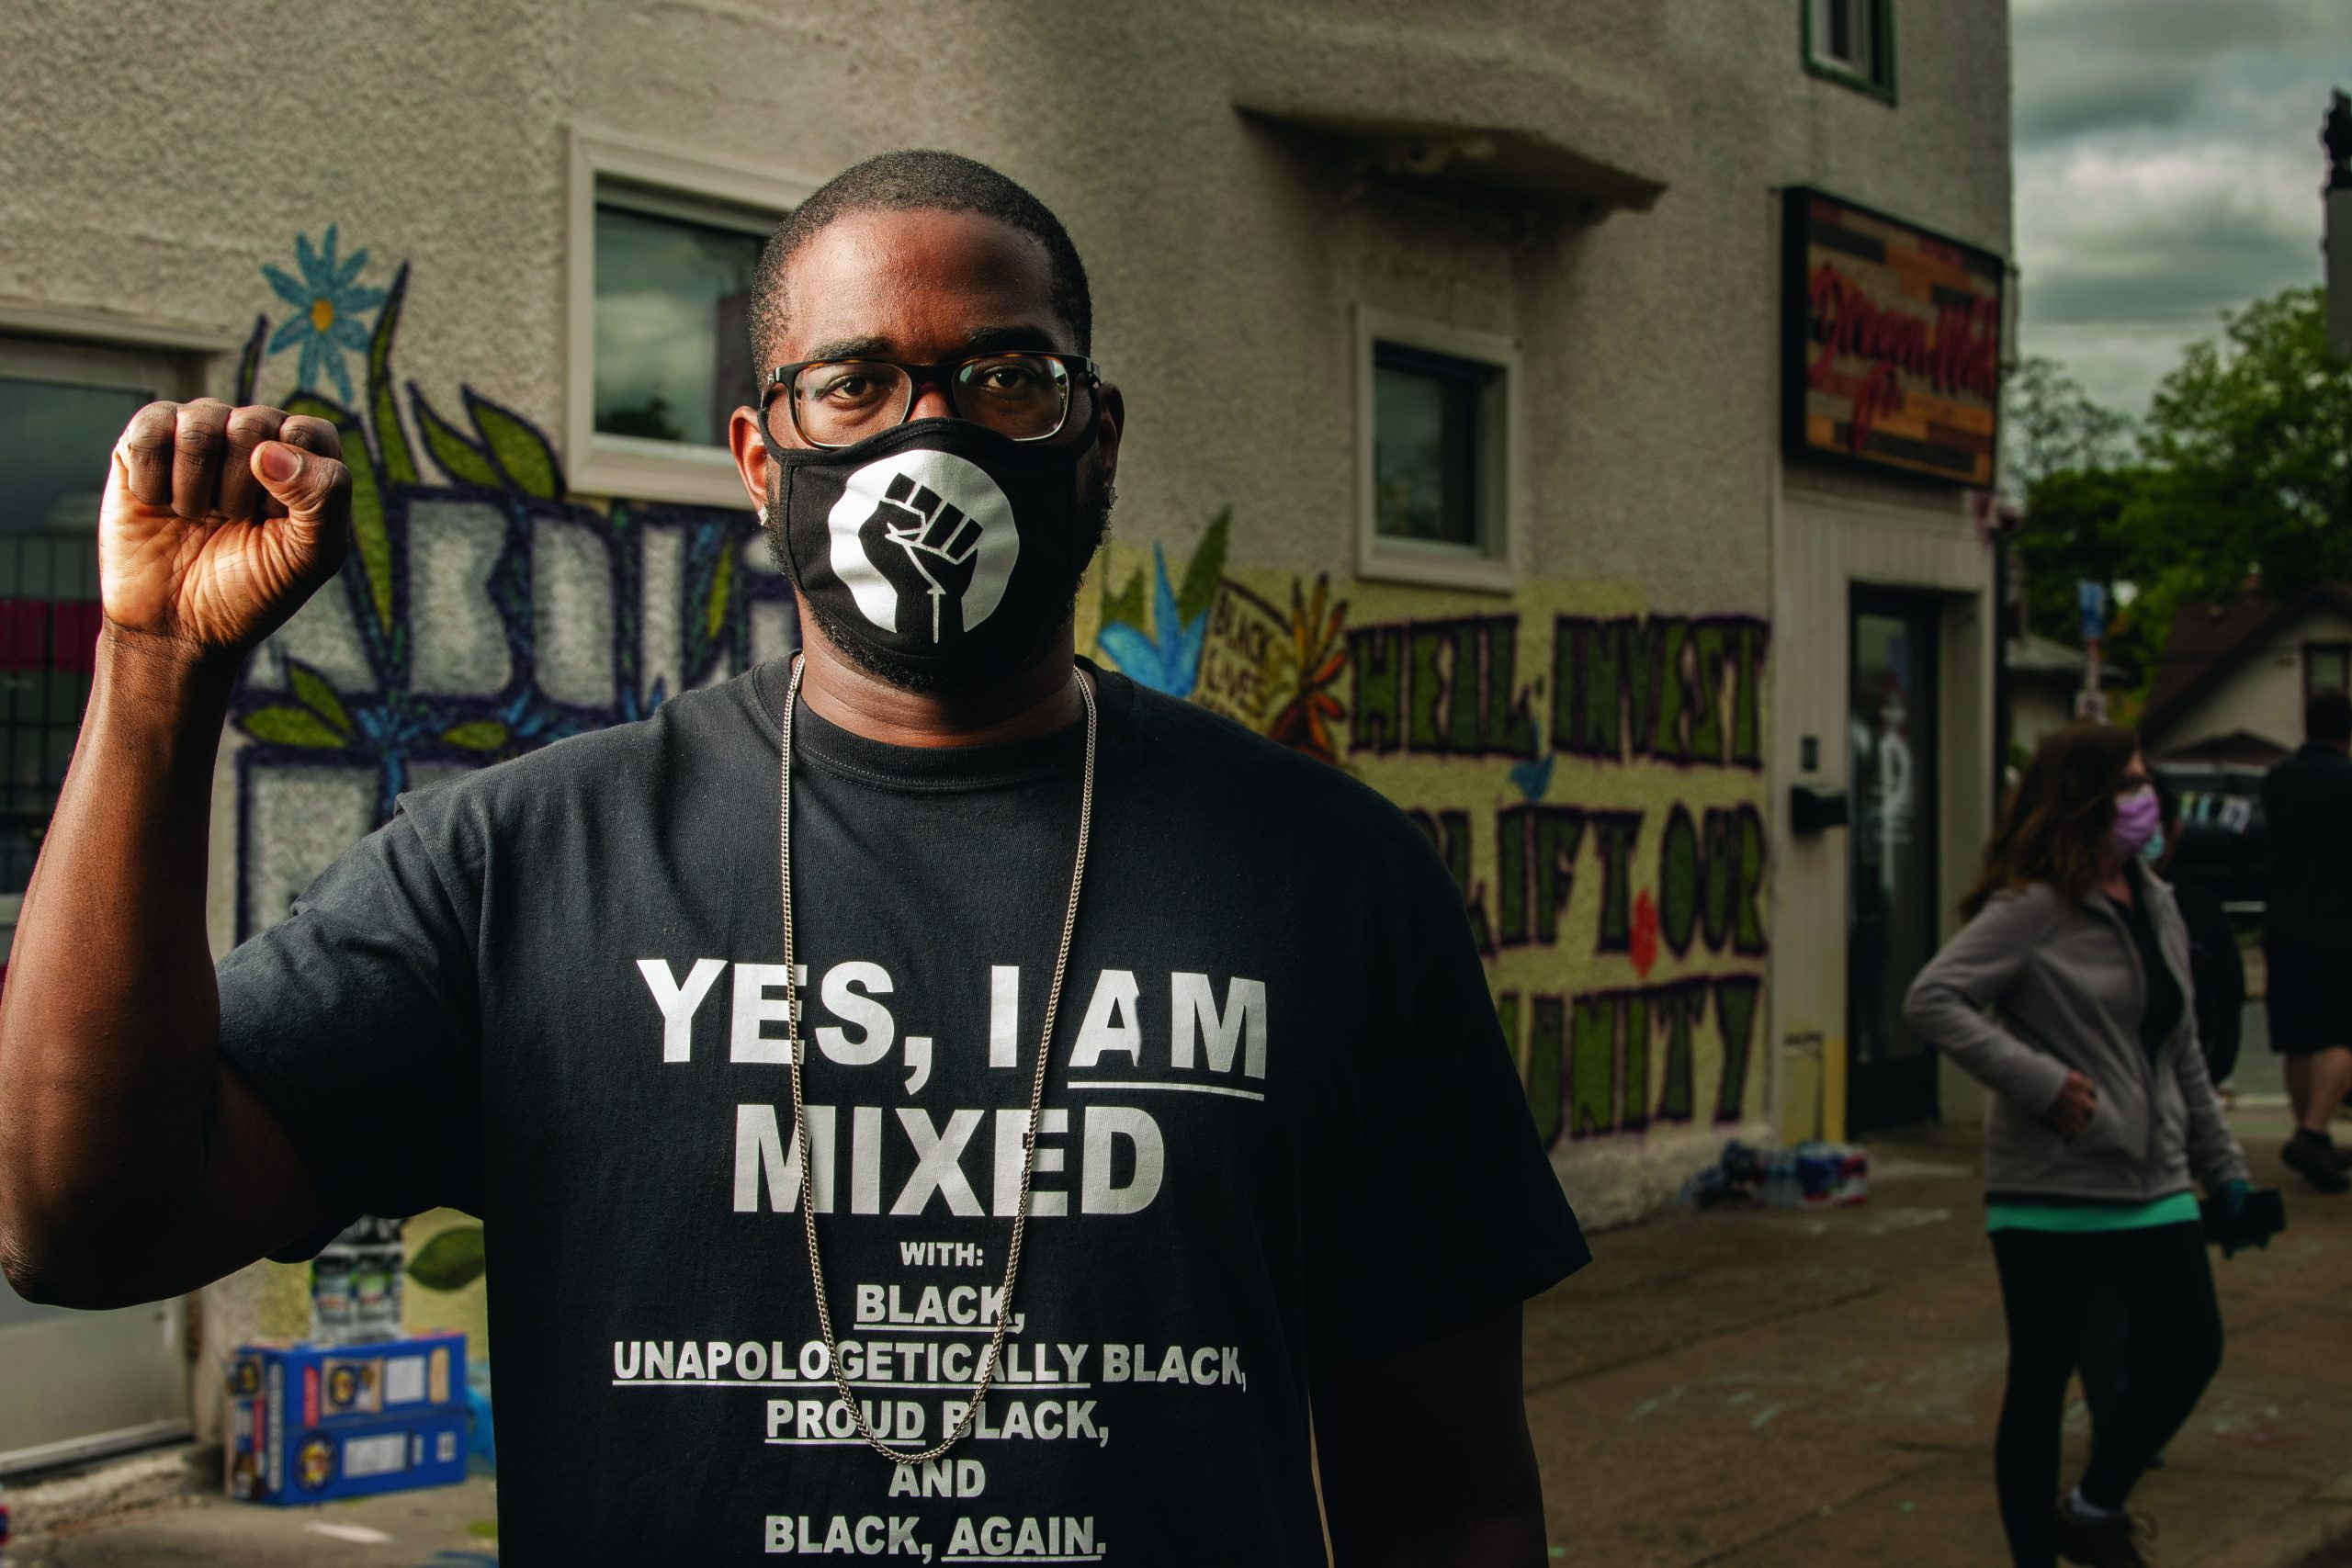 A Black man raises his fist. He wears a facemask with an illustration of a raised fist, and a T-shirt that reads: Yes, I am mixed with Black, unapologetically Black, proud Black, and Black, again